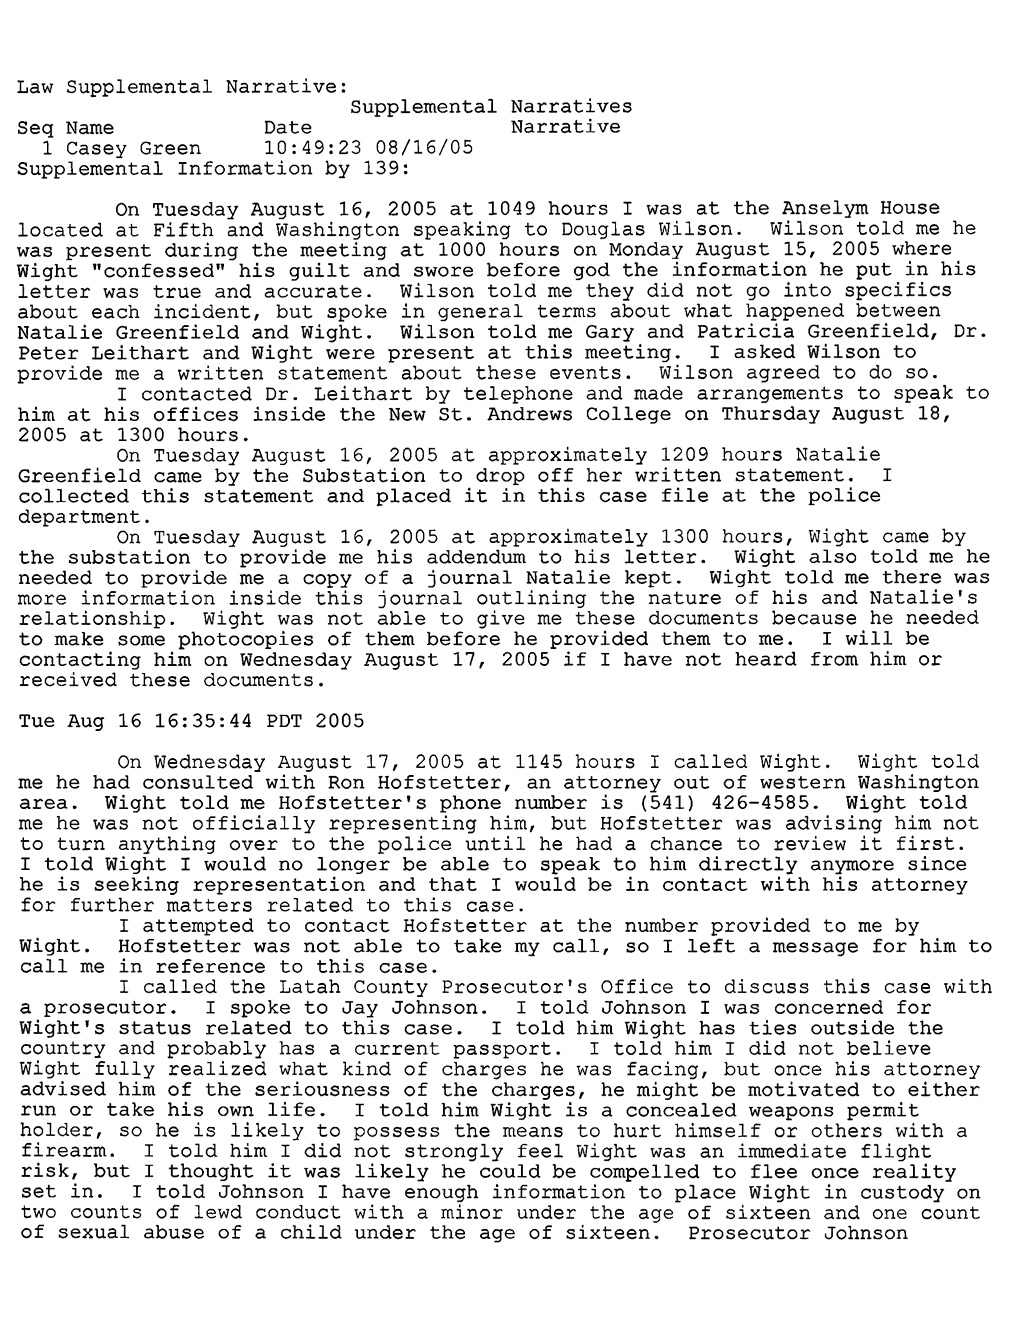 Jamin Wight: Supplemental Police Narrative page 1